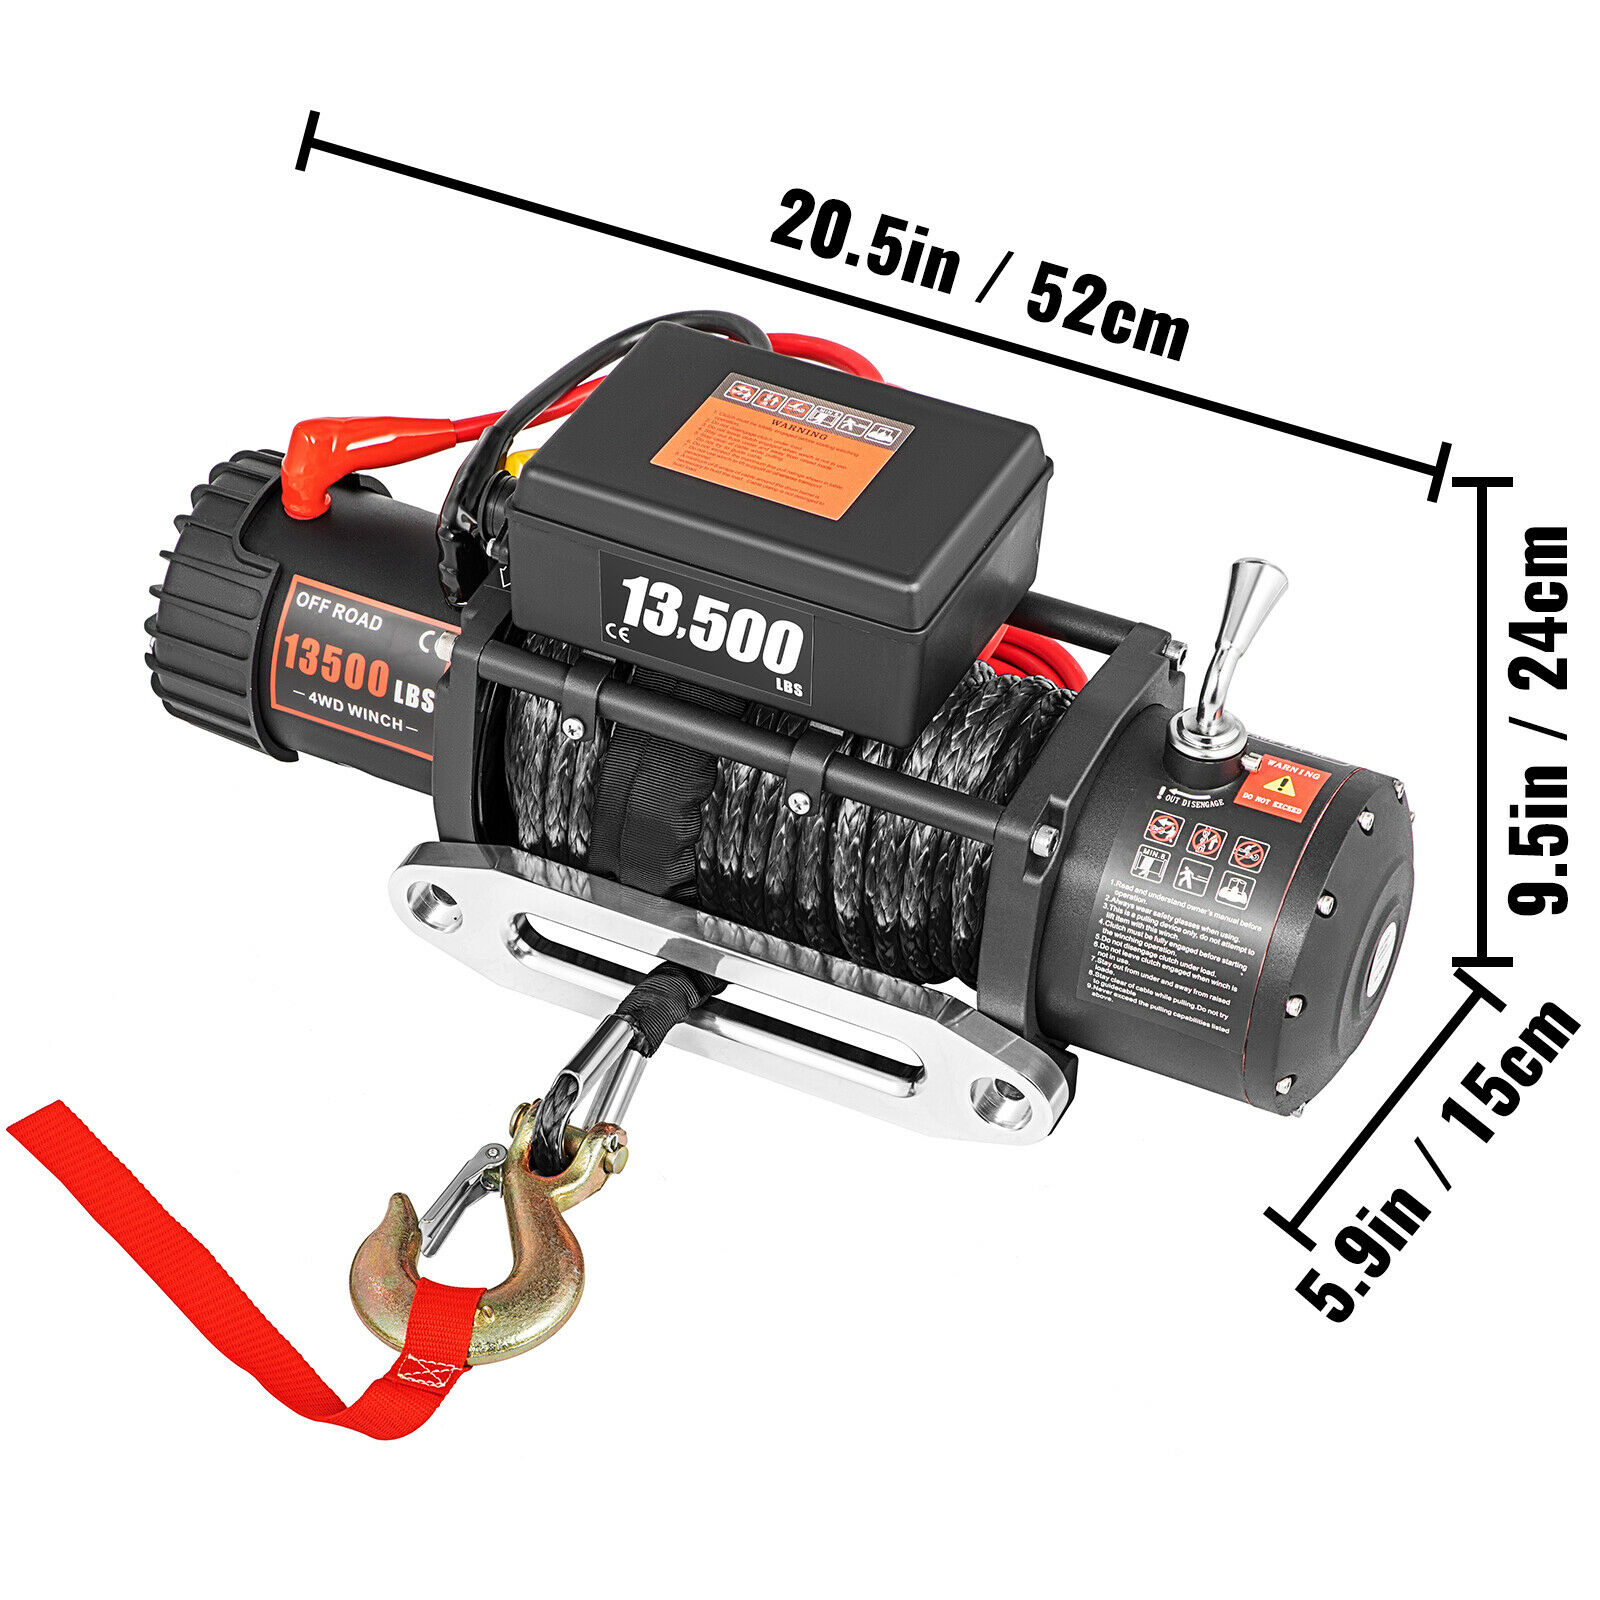 4x4 Winch Synthetic Rope, 12v 13500lbs Electric Winch